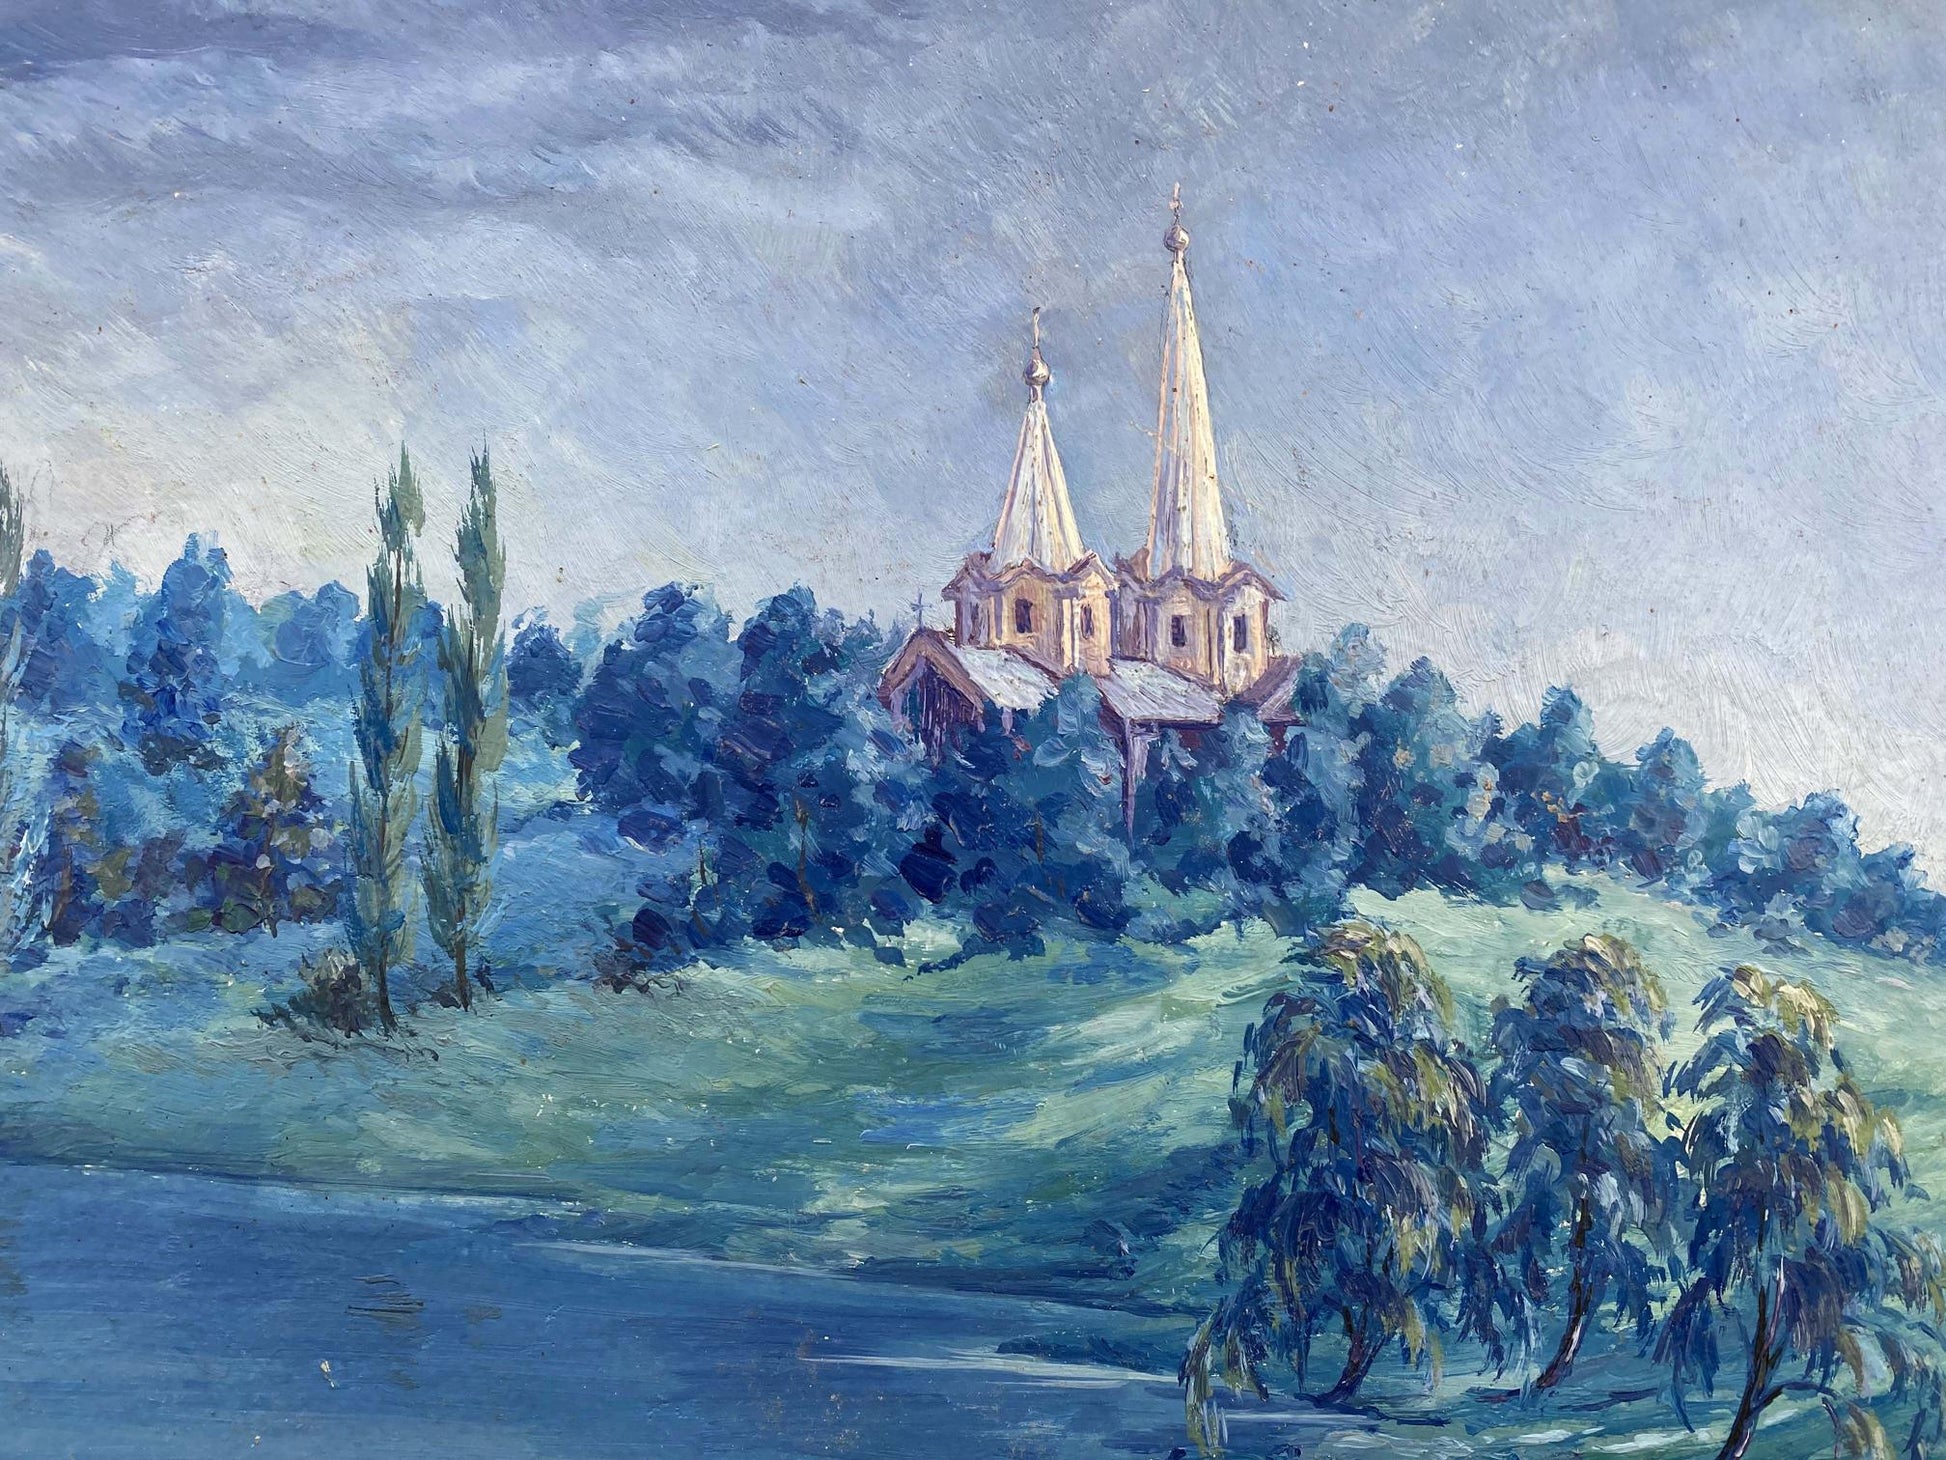 Alexander Vladimirovich Lesik's oil rendition captures a rainbow stretching over the church